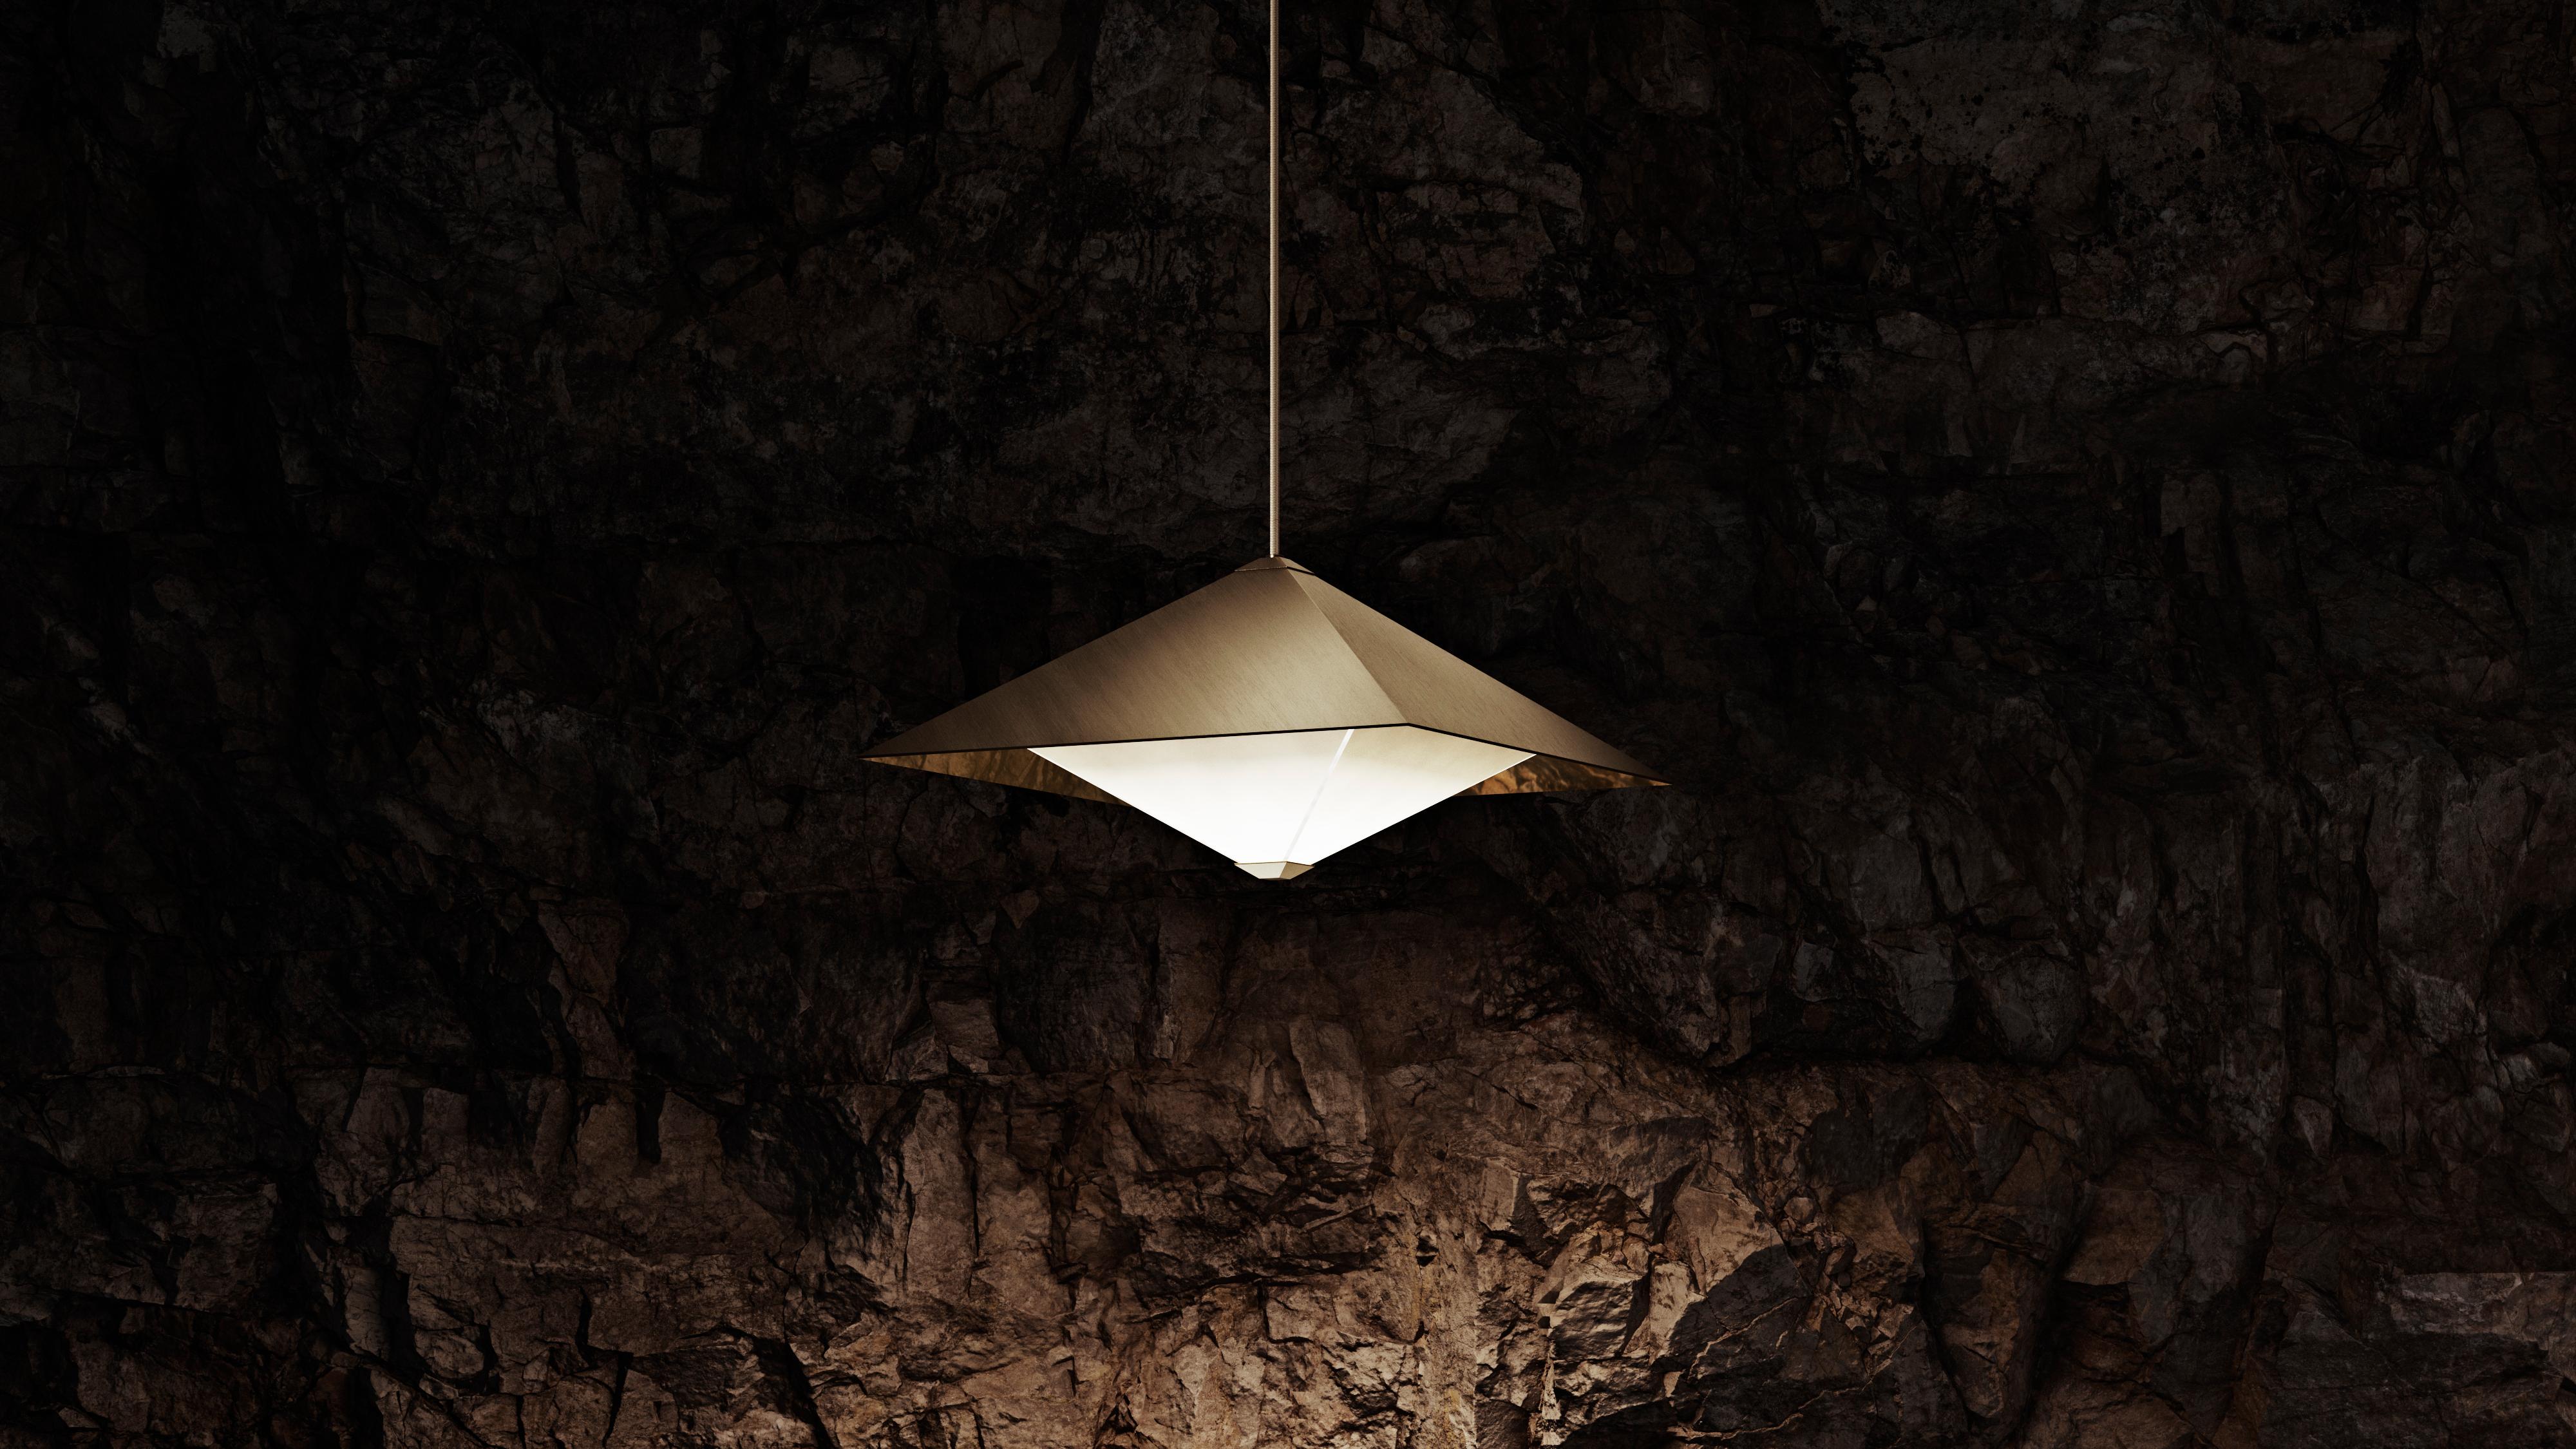 OCTA’s pendant originates from the intersection of two octahedral shapes. A brass shade and a frosted diffuser. The latter floats below the mirrored surfaces of the shade; shapes are reflected and multiplied, displaying a unique optical